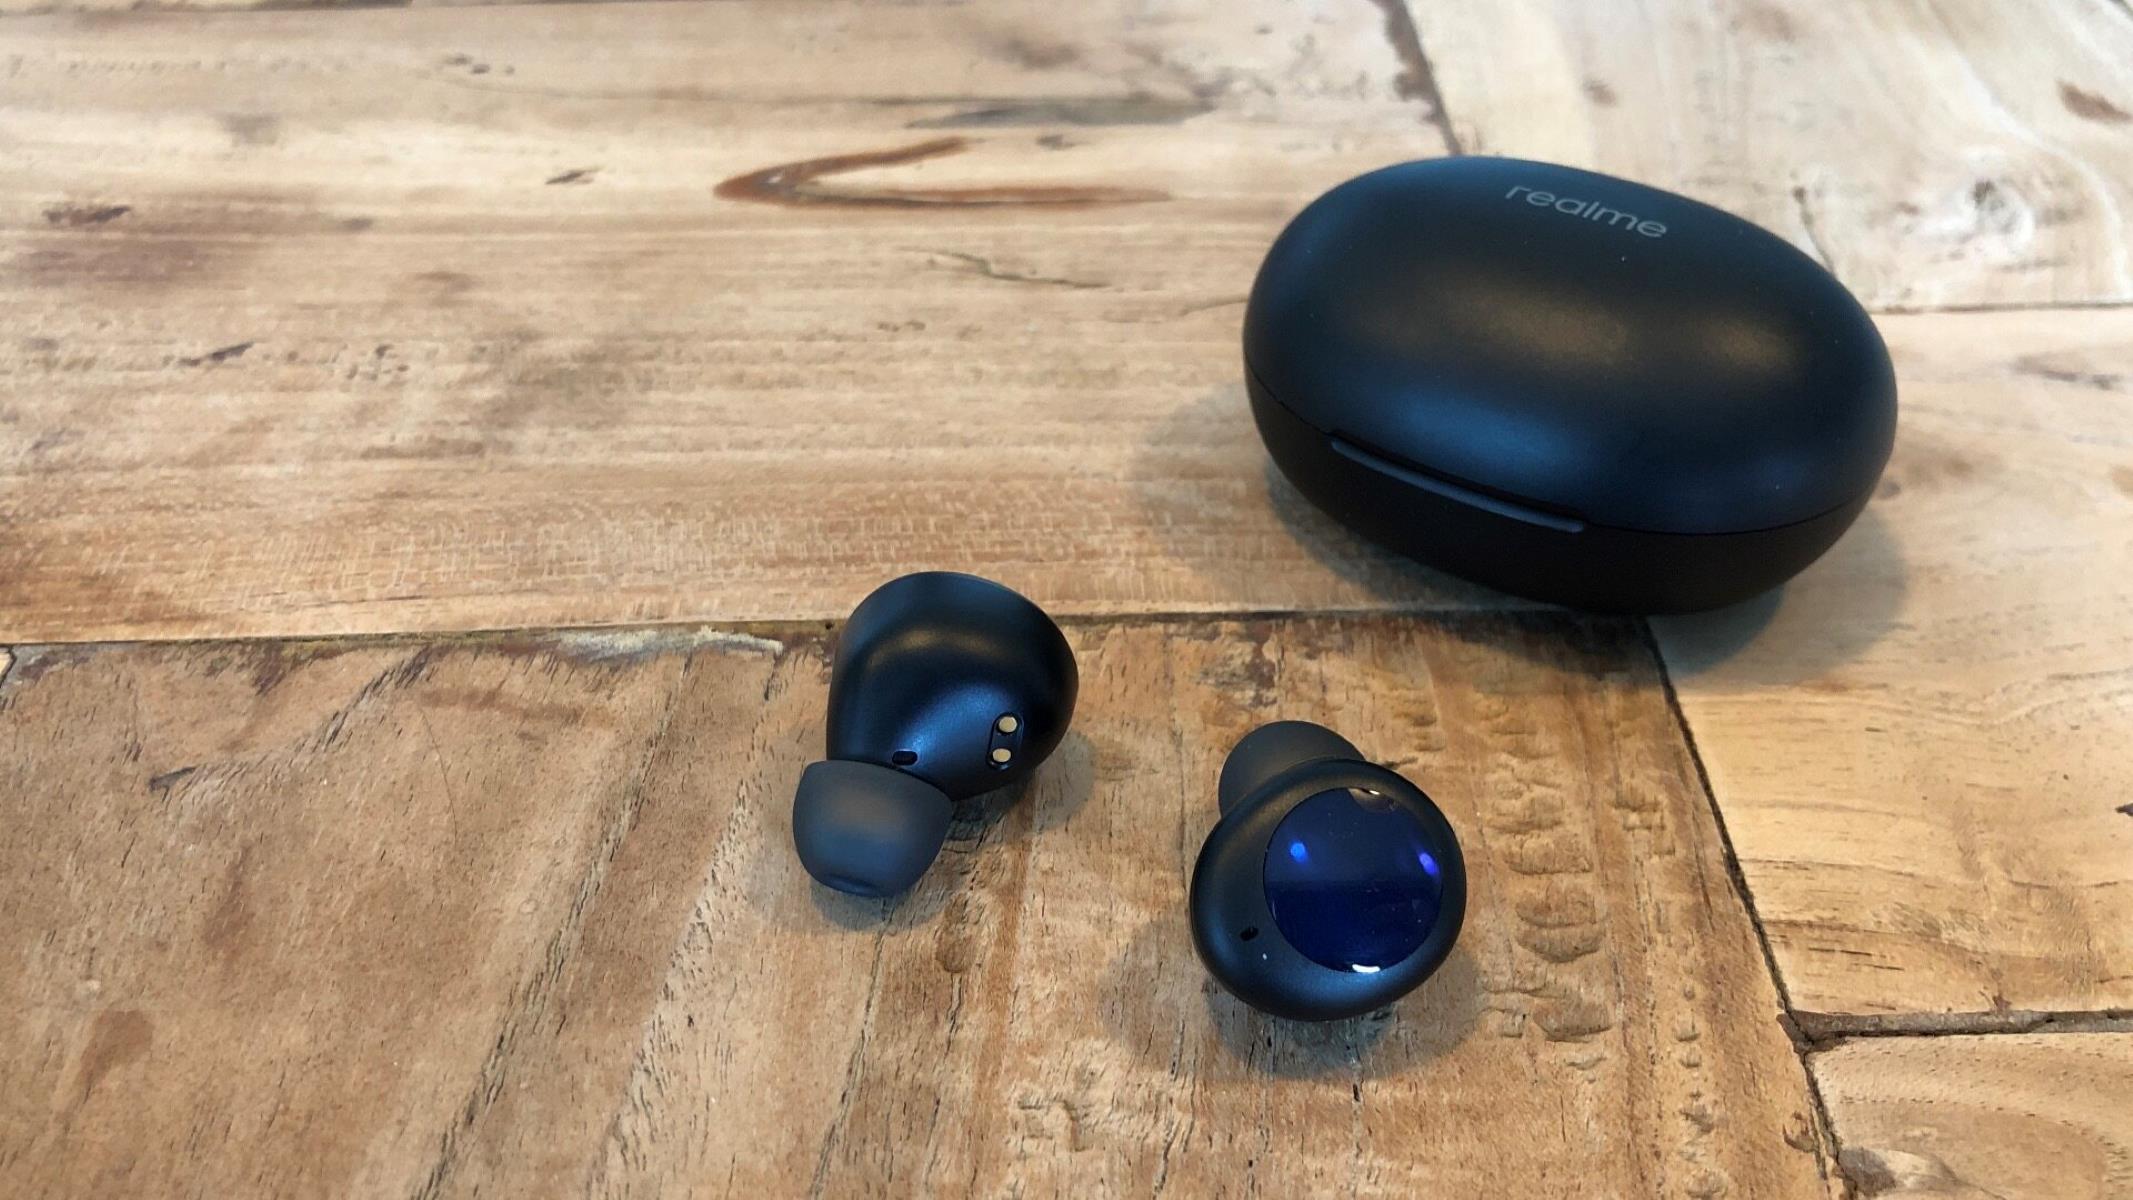 Quick Guide To Finding Lost Realme Earbuds